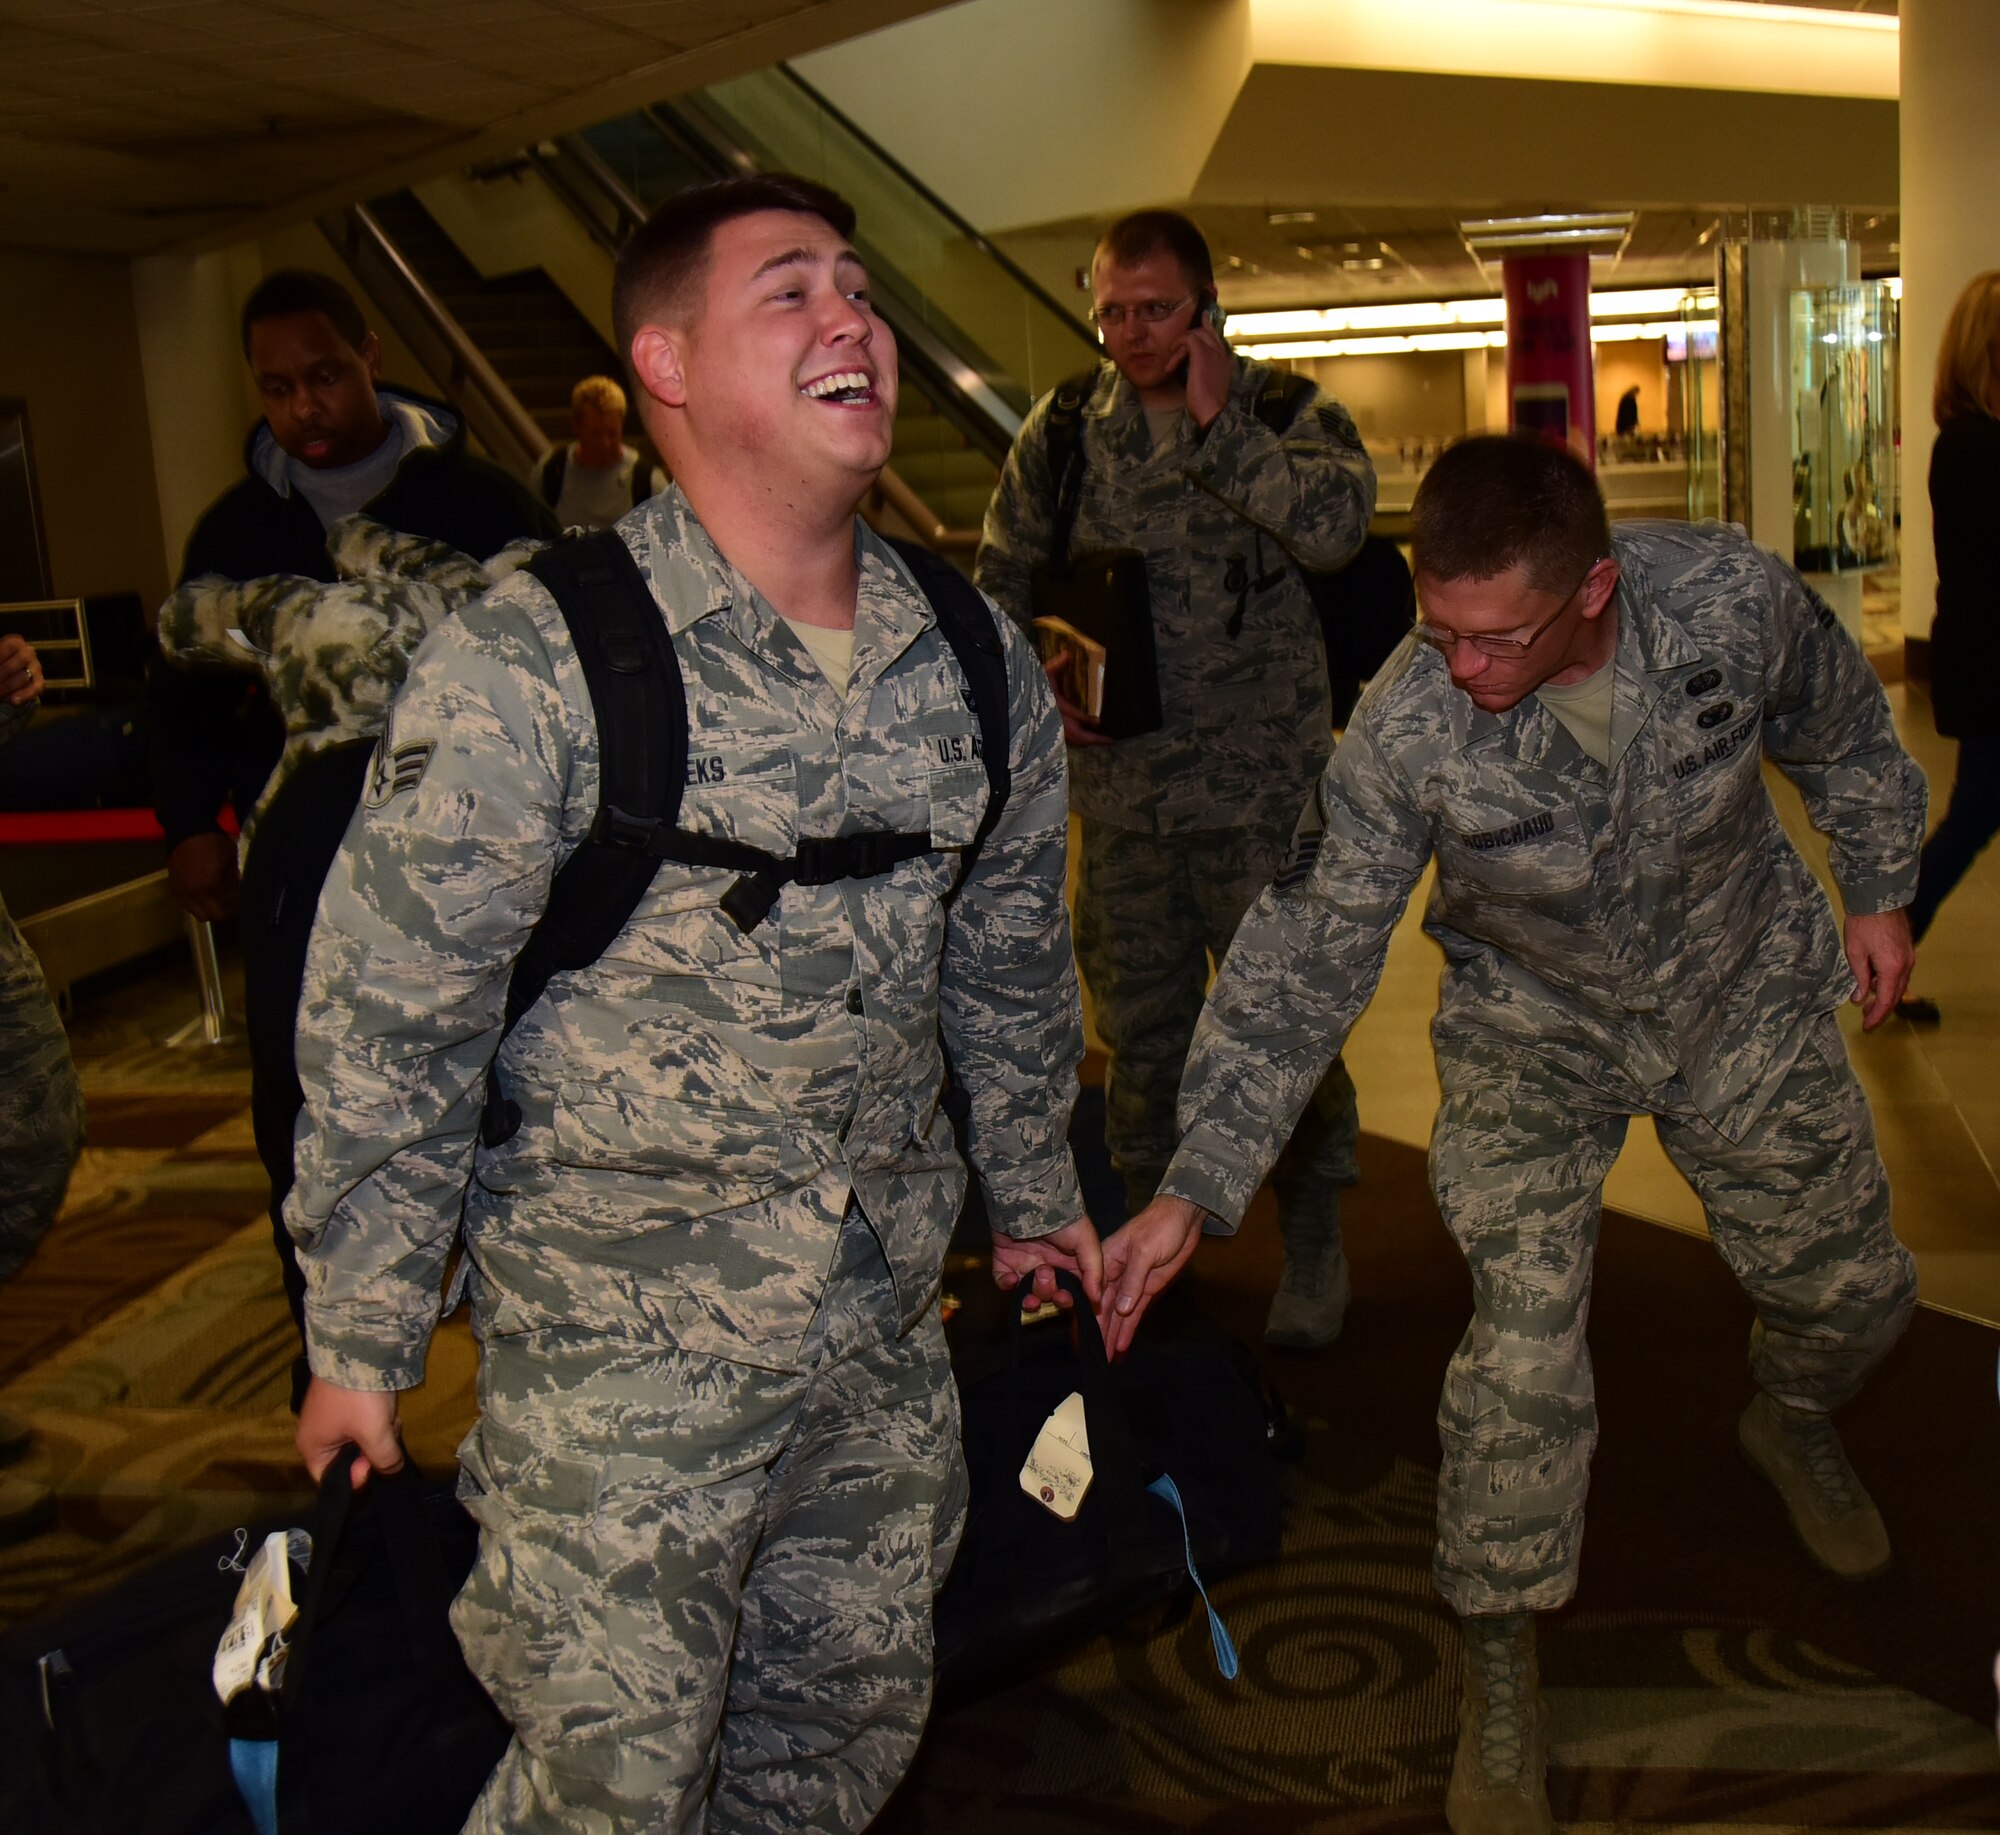 Senior Airman Tyler Meeks, a member of the 118th Security Forces Squadron, collects his bags upon returning from deployment Nov. 6, 2016 in Nashville, Tennessee. Many members of the 118th SF deployed for six months to Al Dhafra Air Base in the United Arab Emirates. 